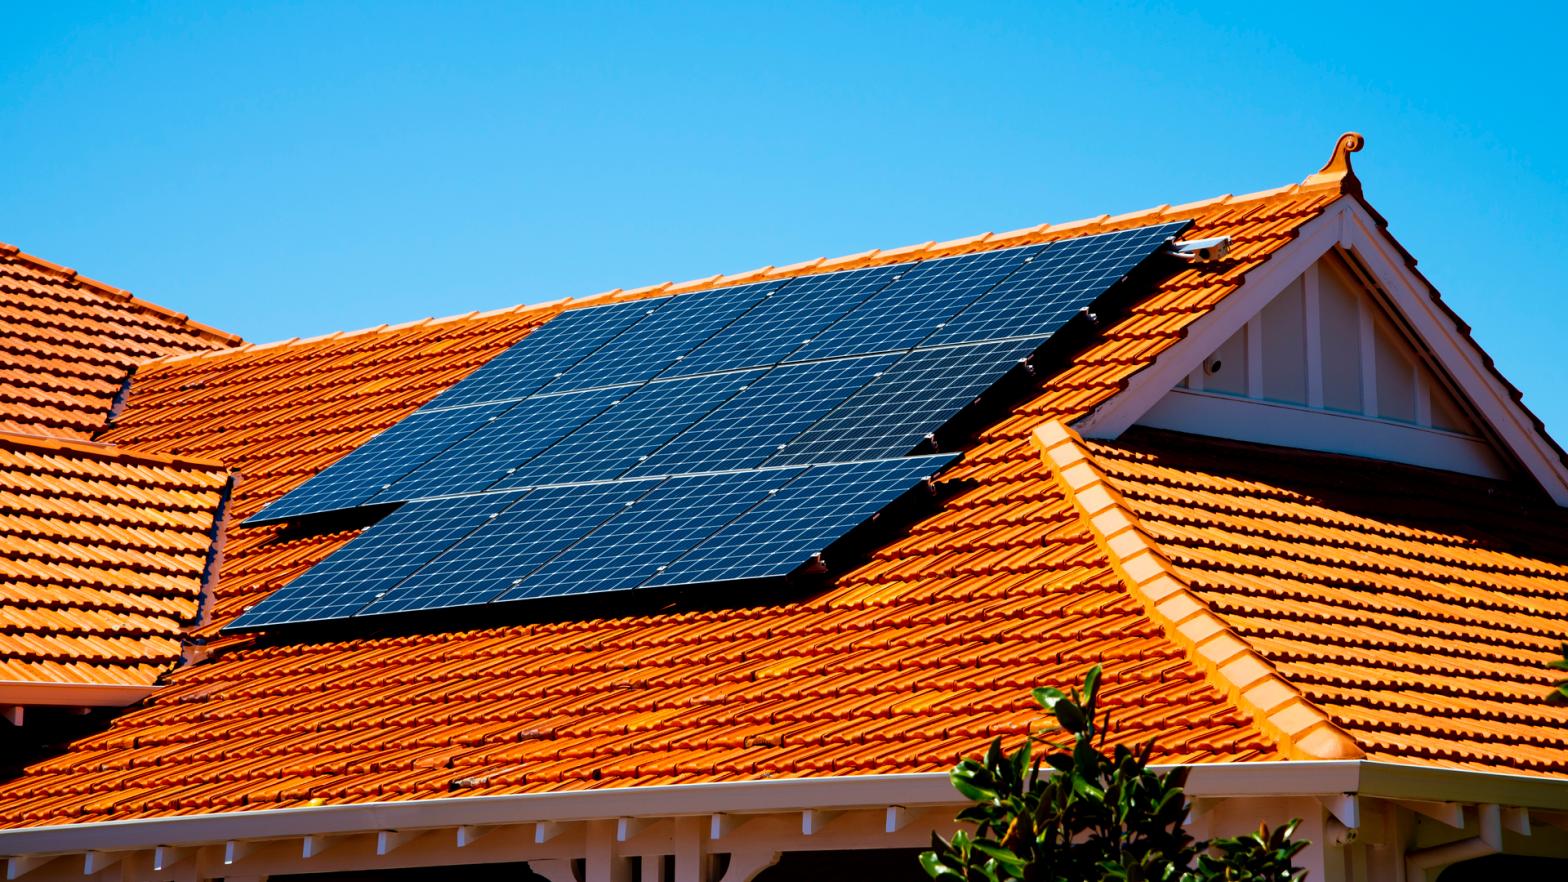 Residential Solar Panels save electricity